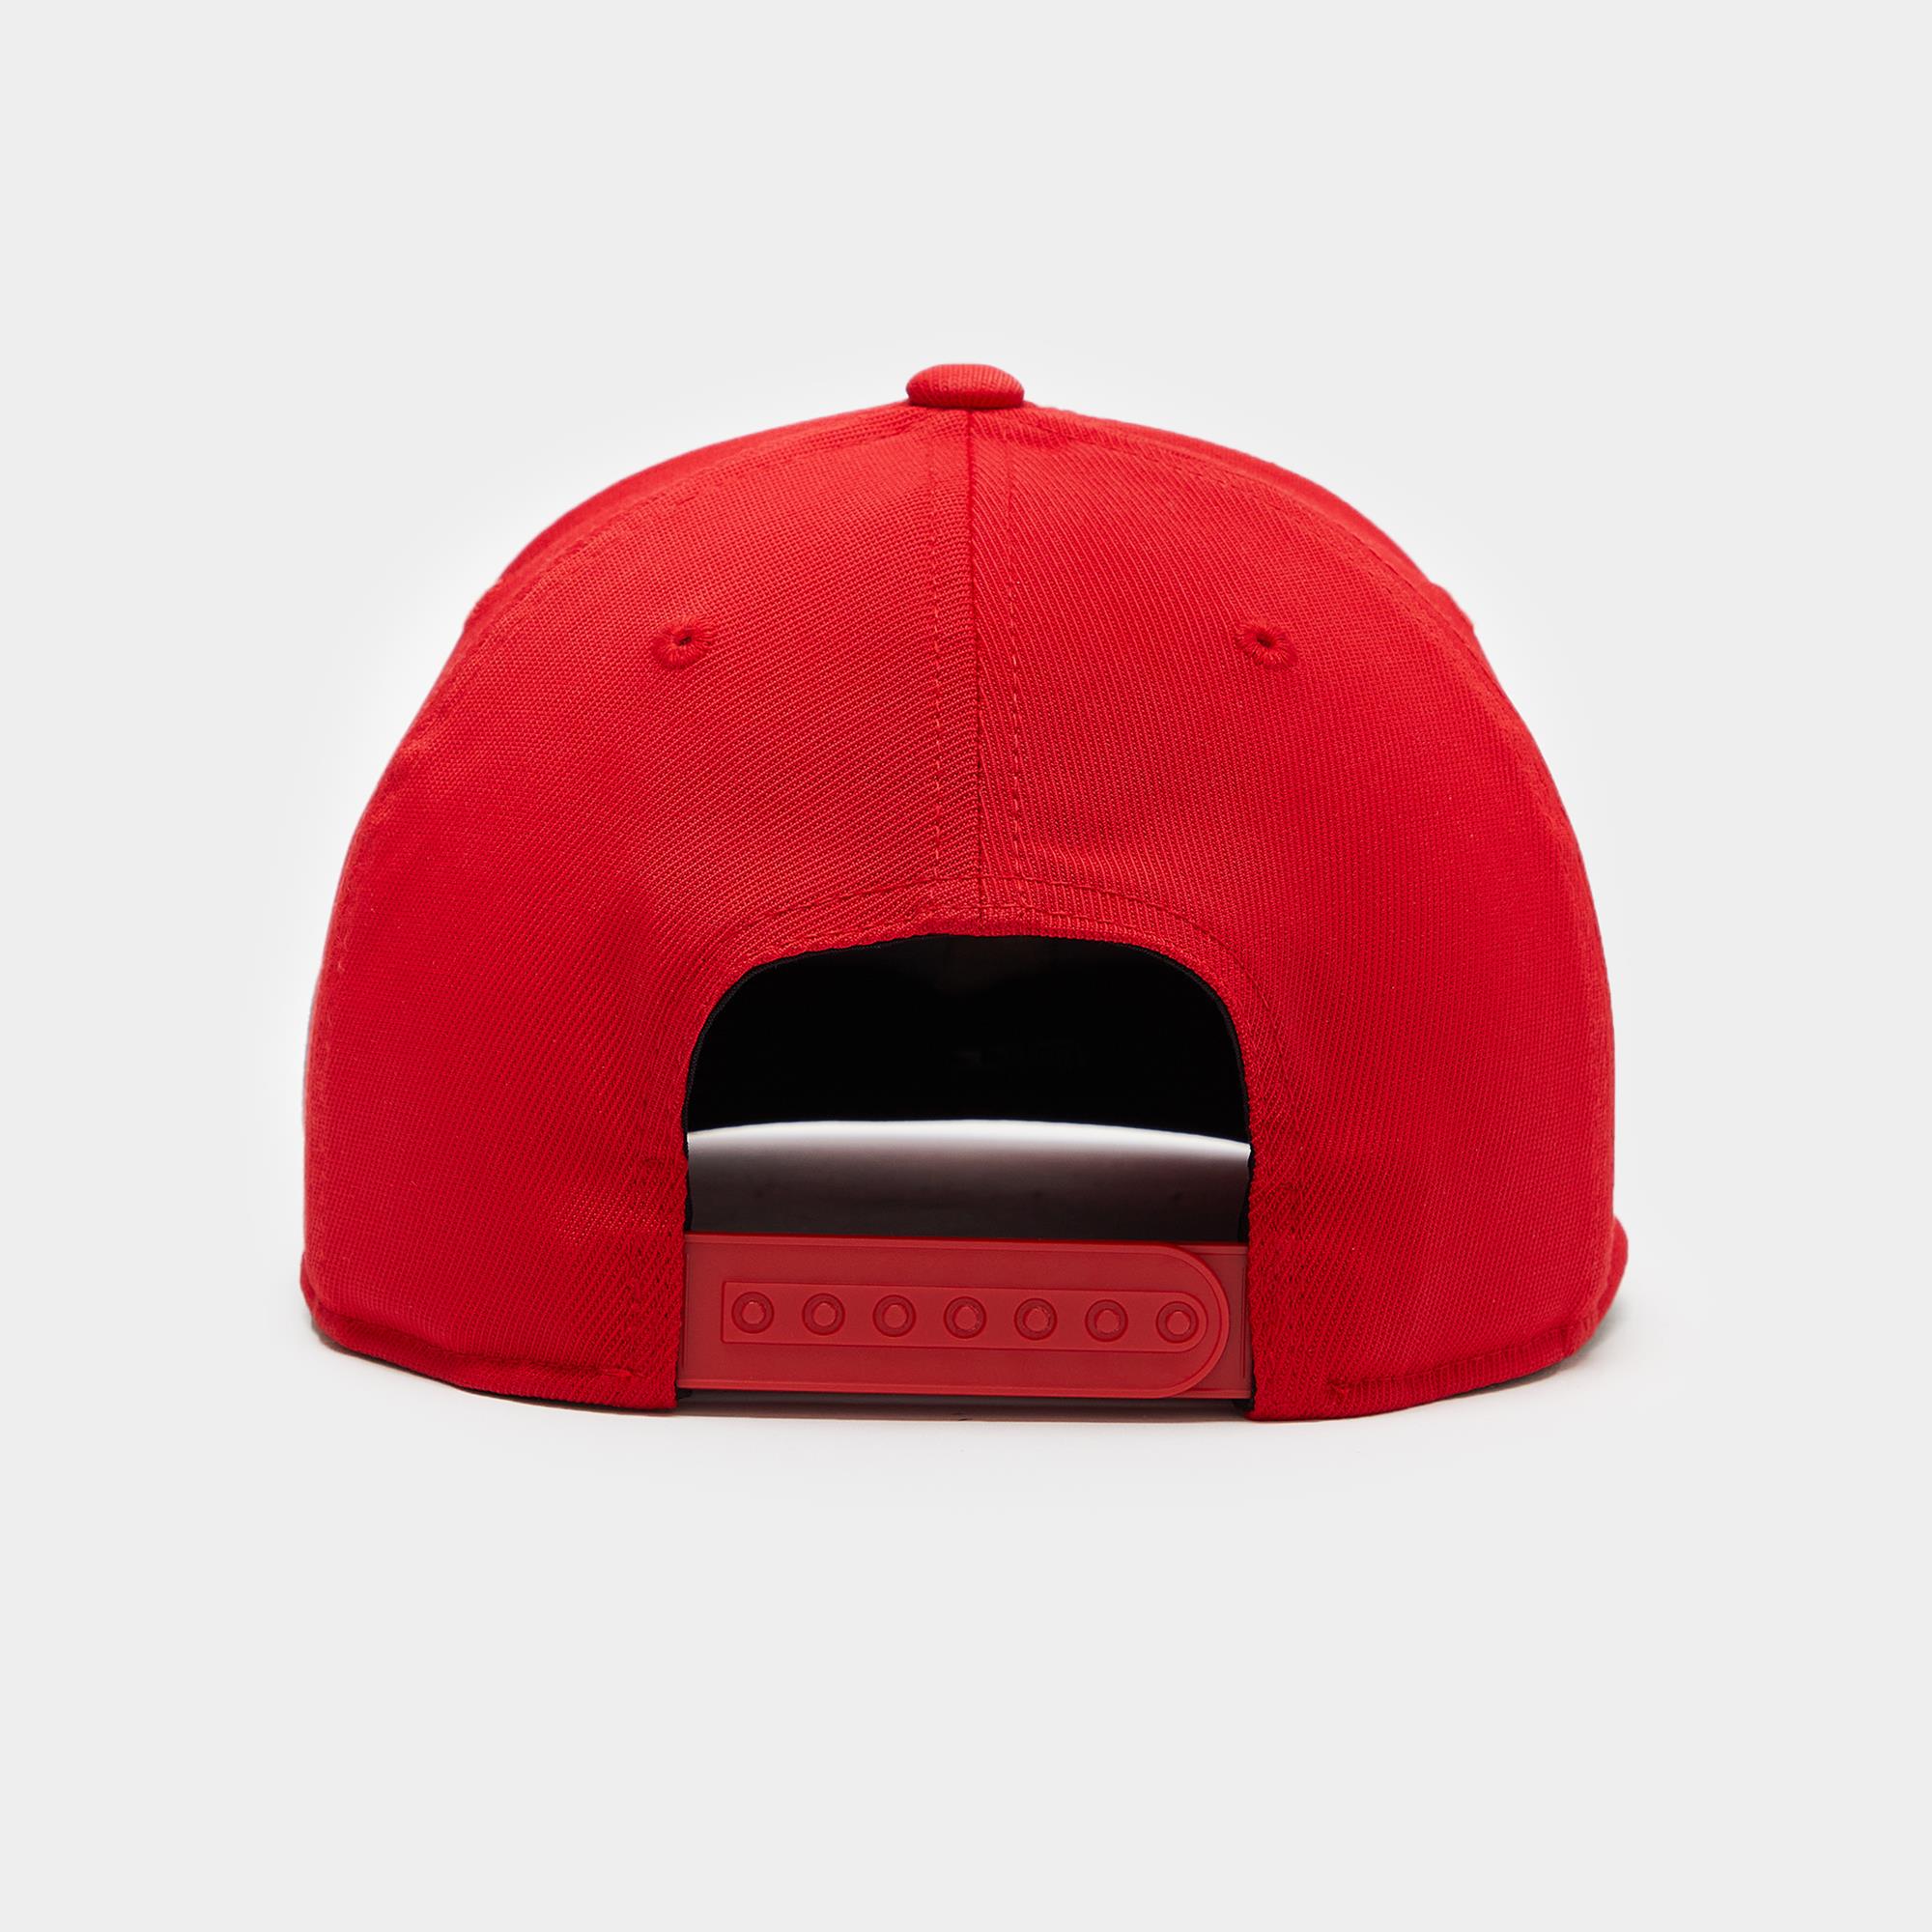 G/FORE NO 1 Cares What You Shot Snapback Cap Poppy